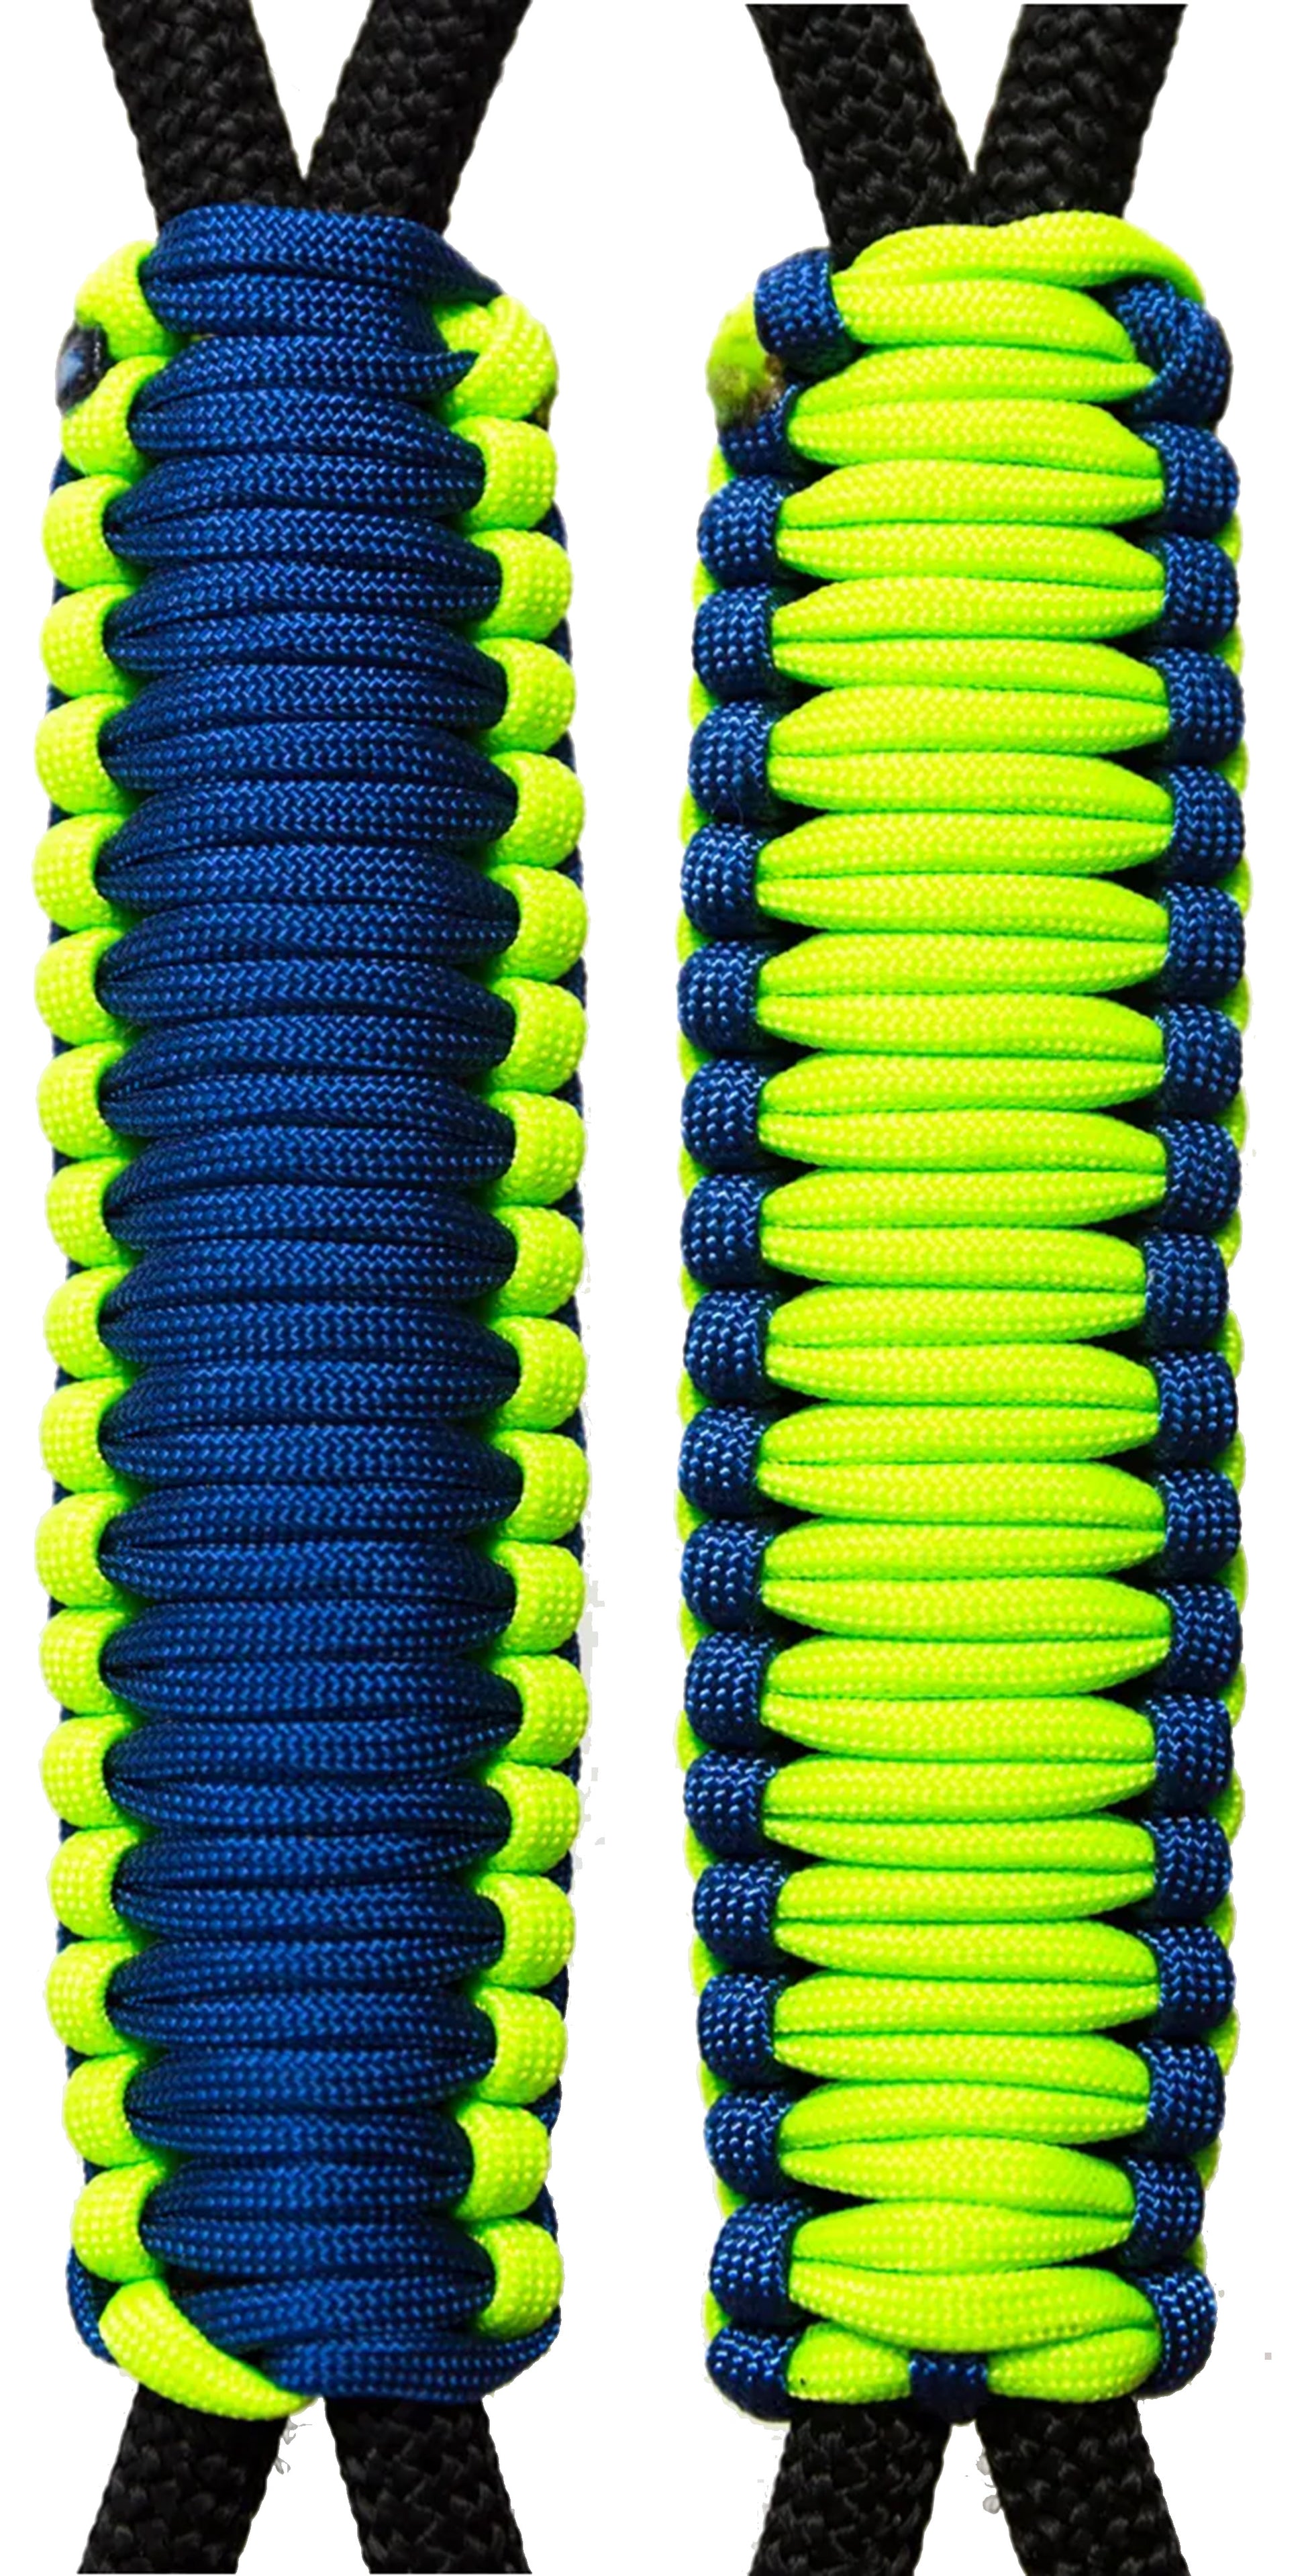 Royal Blue & Neon Green -C011C023 - Paracord Handmade Handles for Stainless Steel Tumblers - Made in USA!